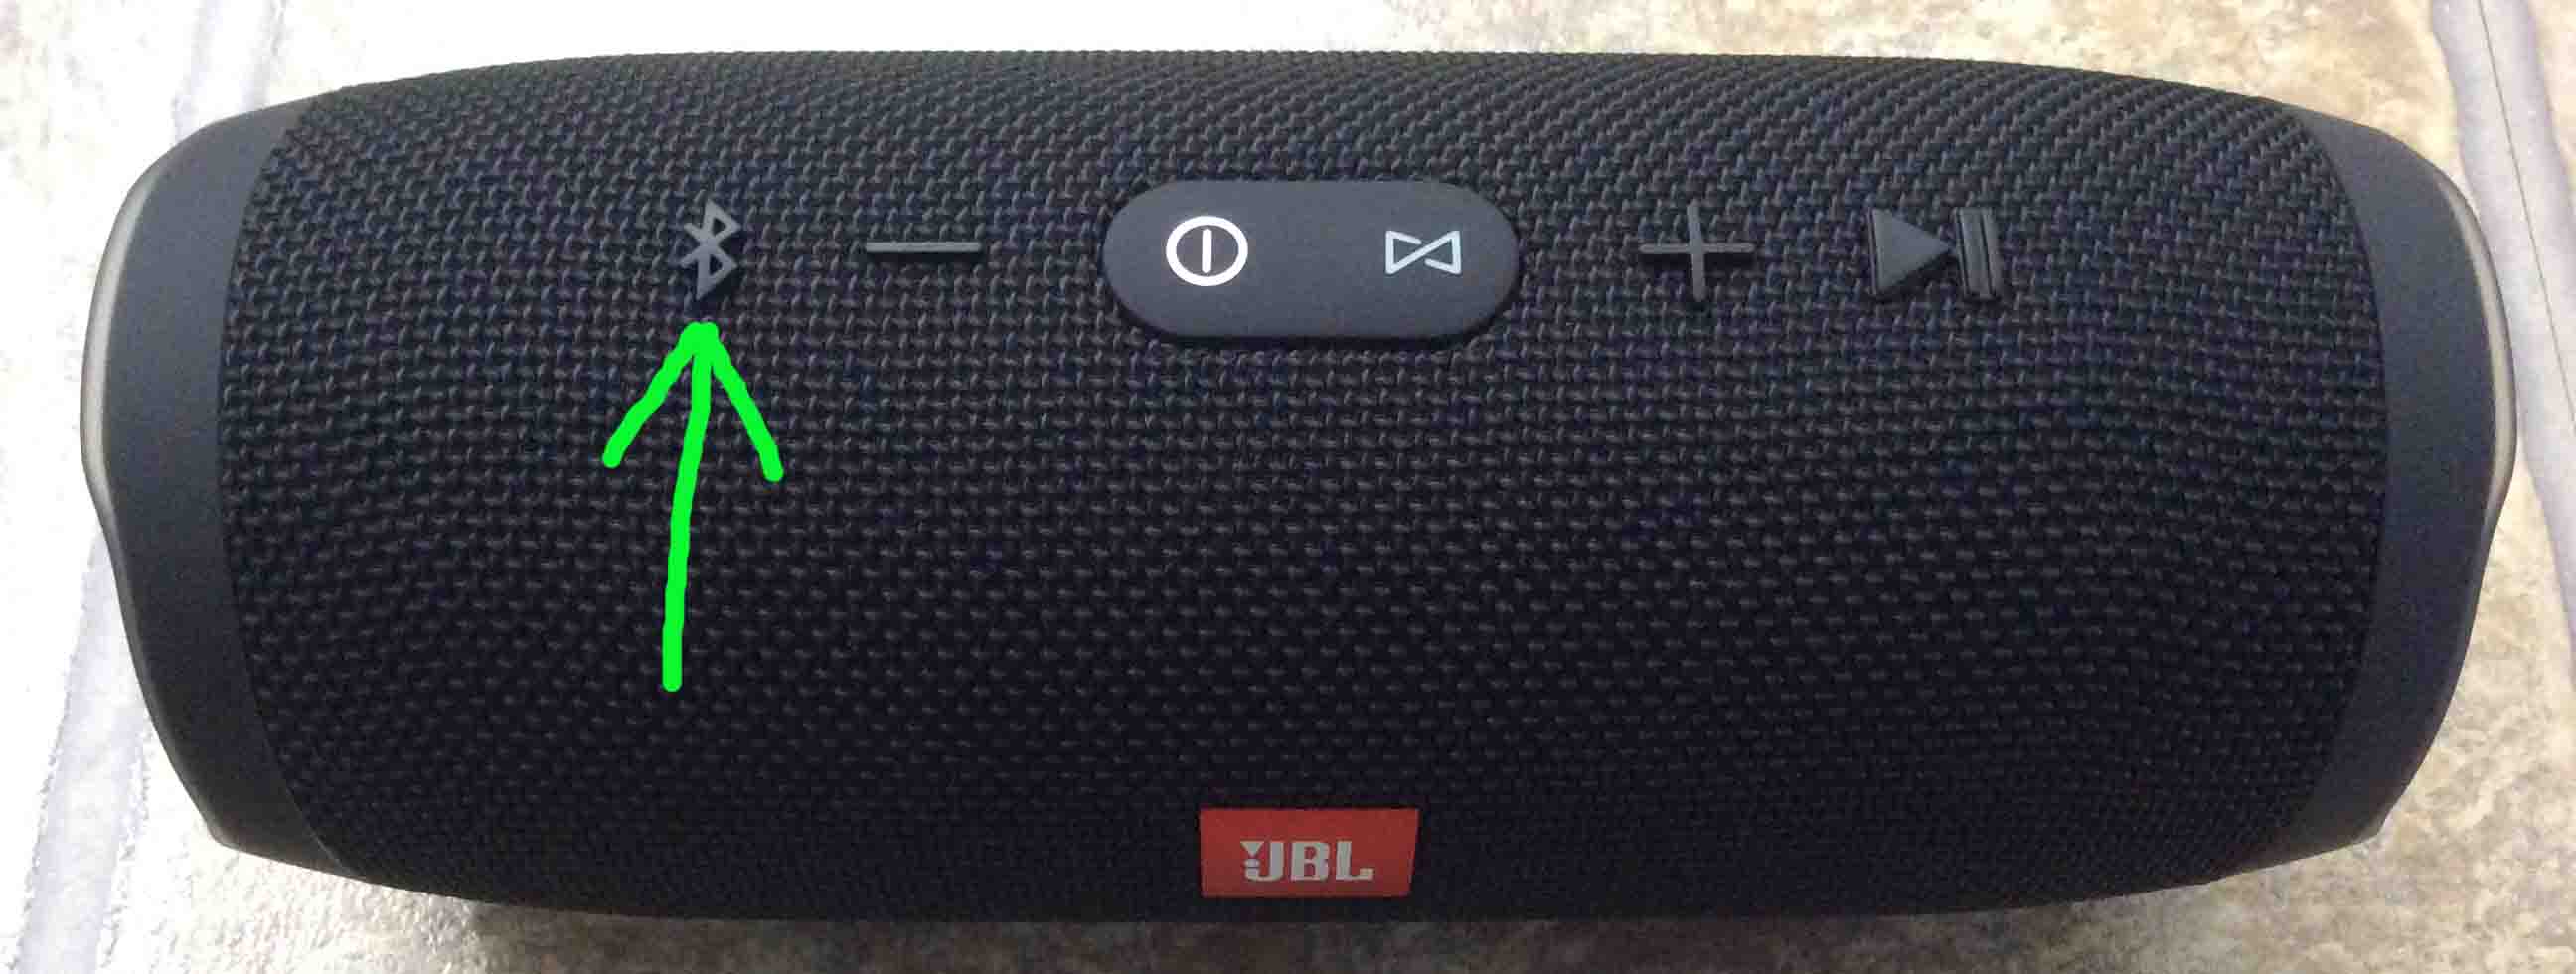 JBL Charge Buttons, Combinations, Meanings - Stop